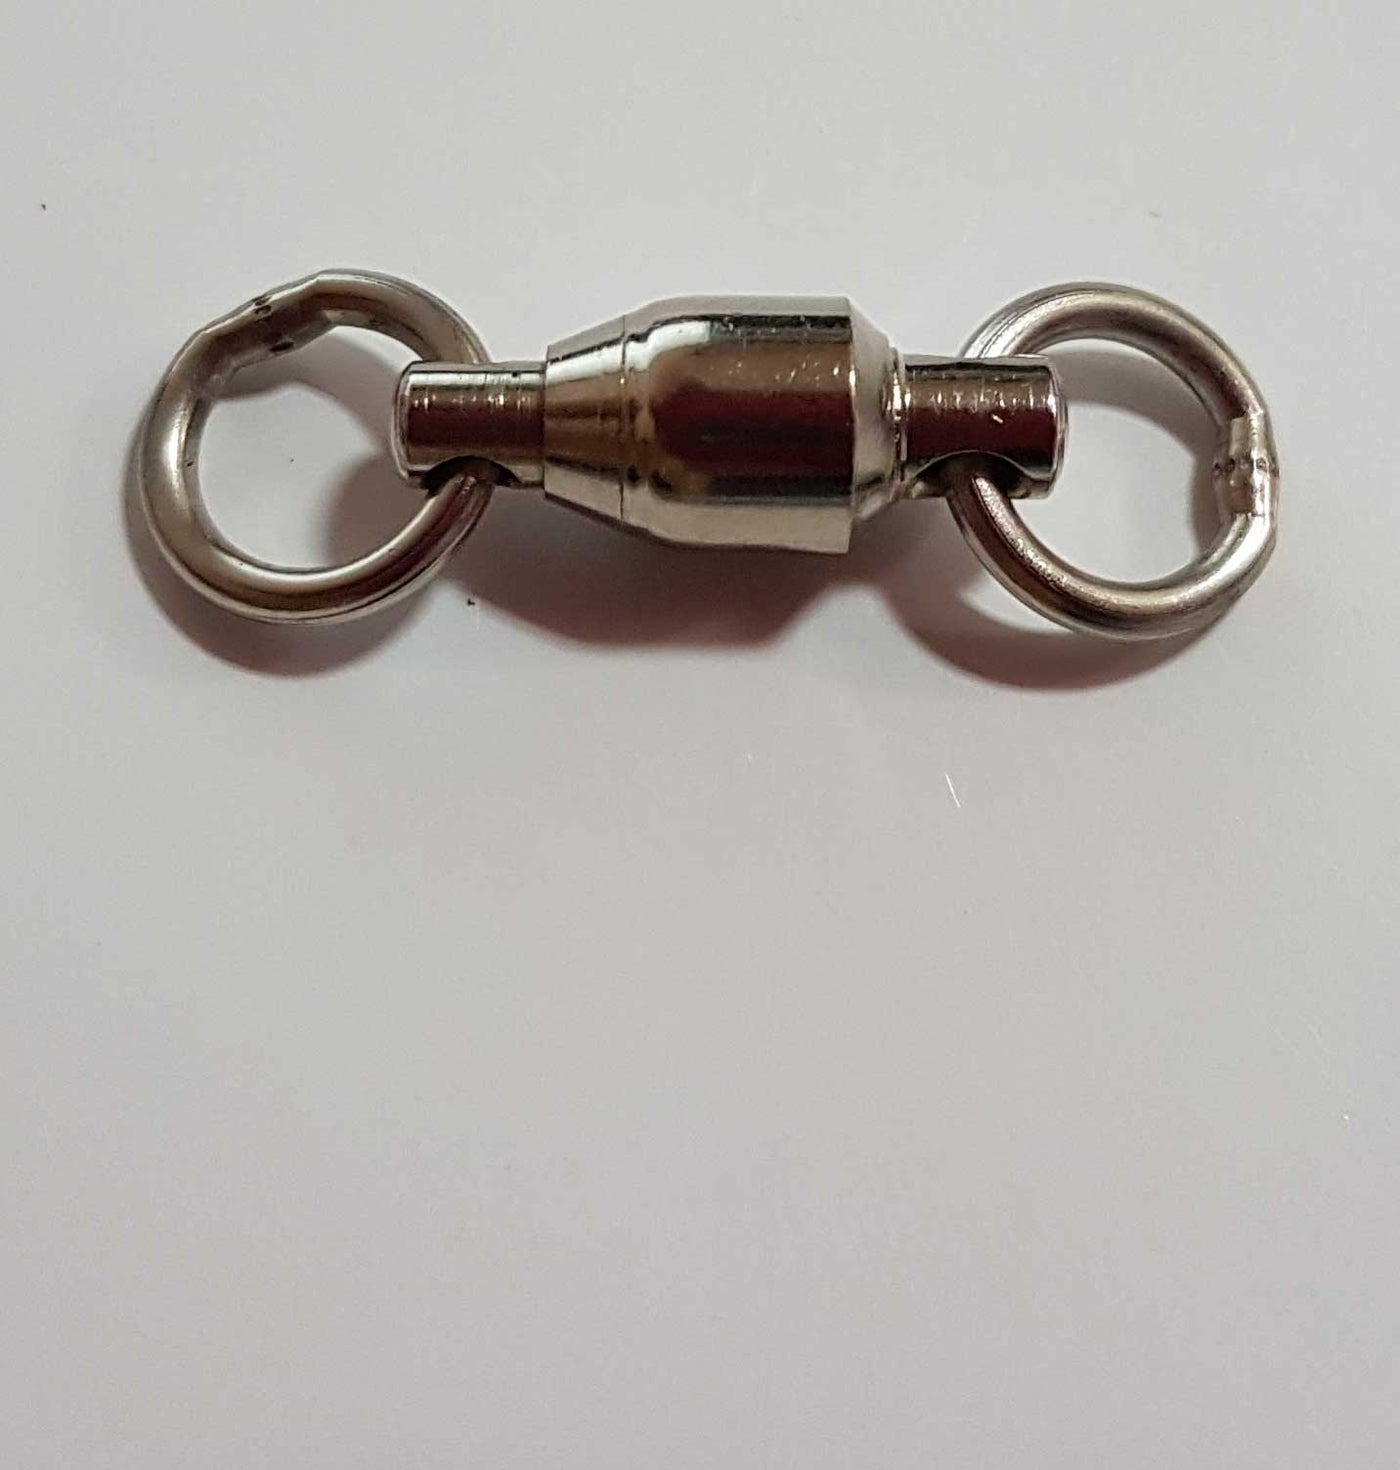 Bearing swivel 23mm long with two rings